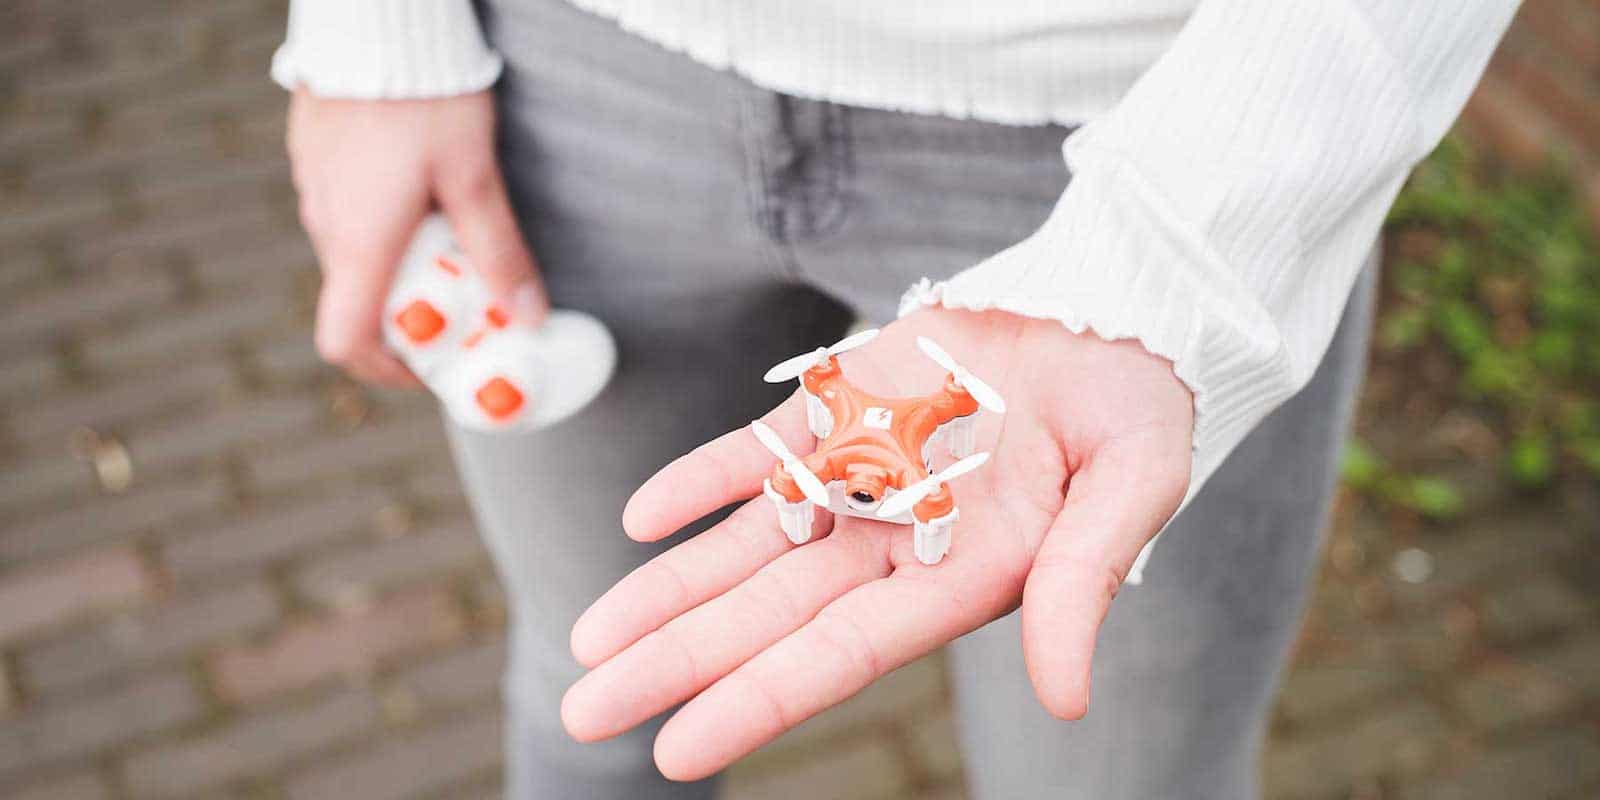 Take to the skies from your picnic blanket with this user friendly, super tiny drone.